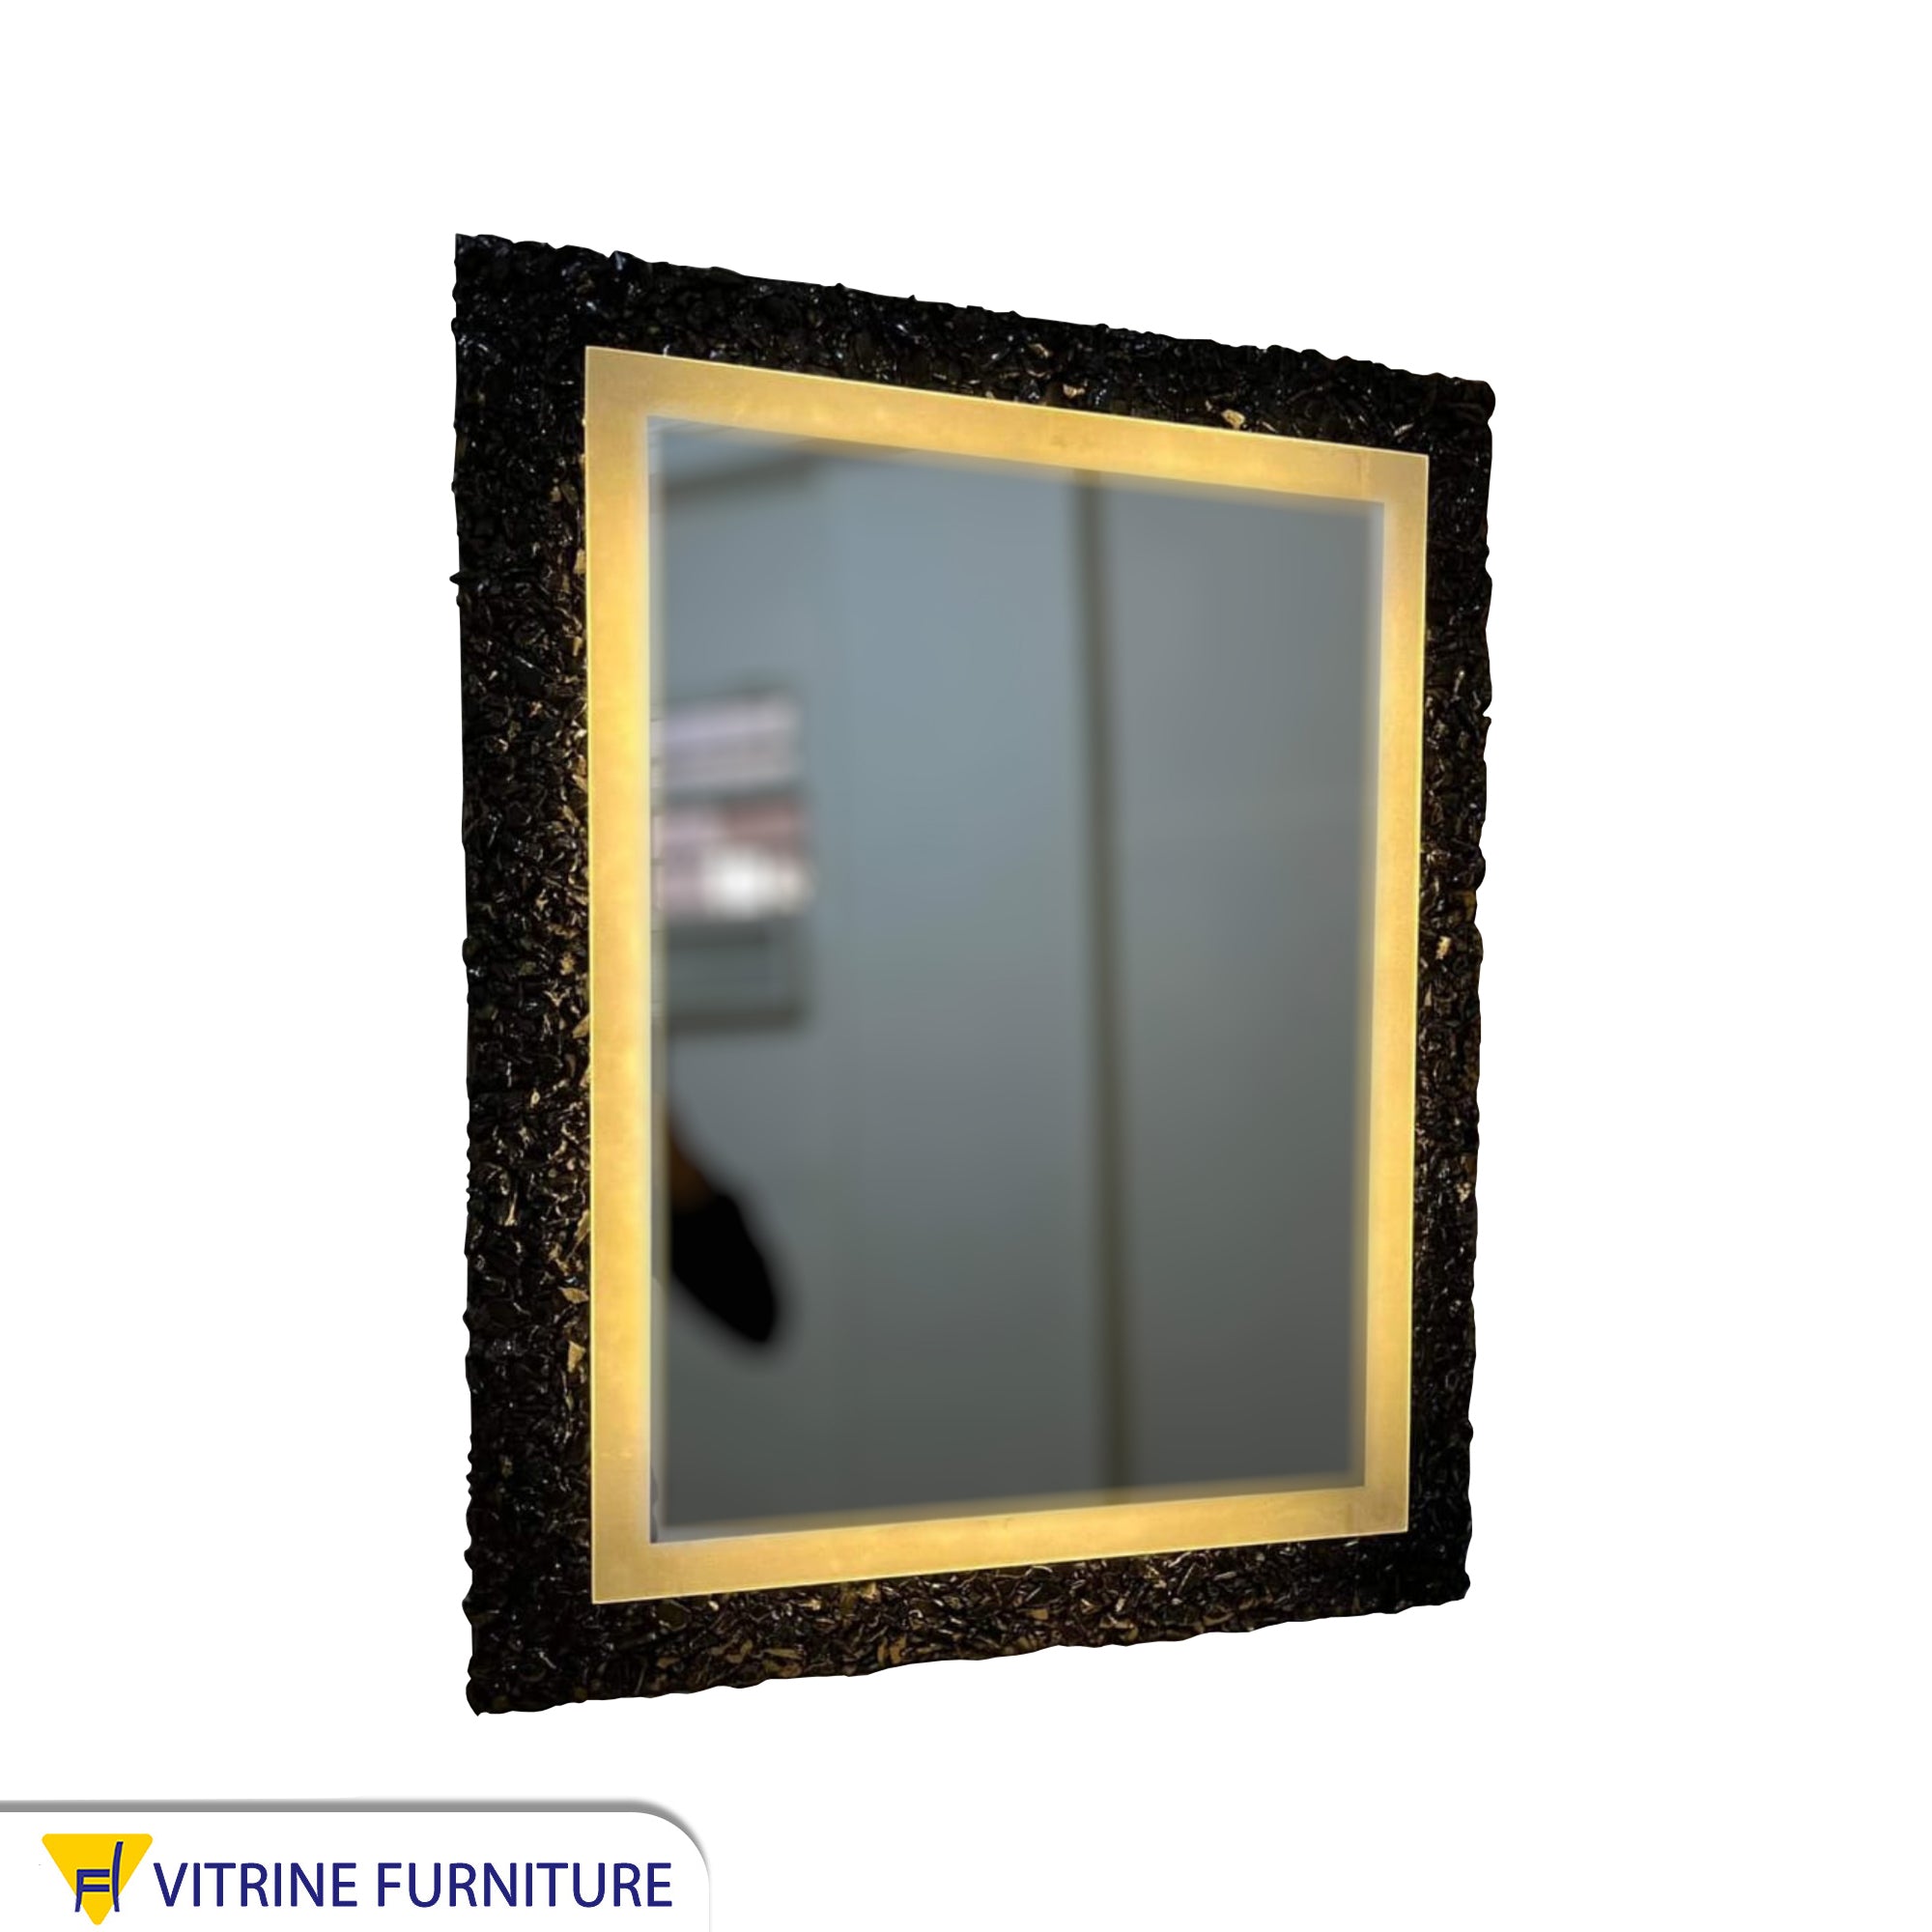 Rectangular LED mirror with a black marble frame